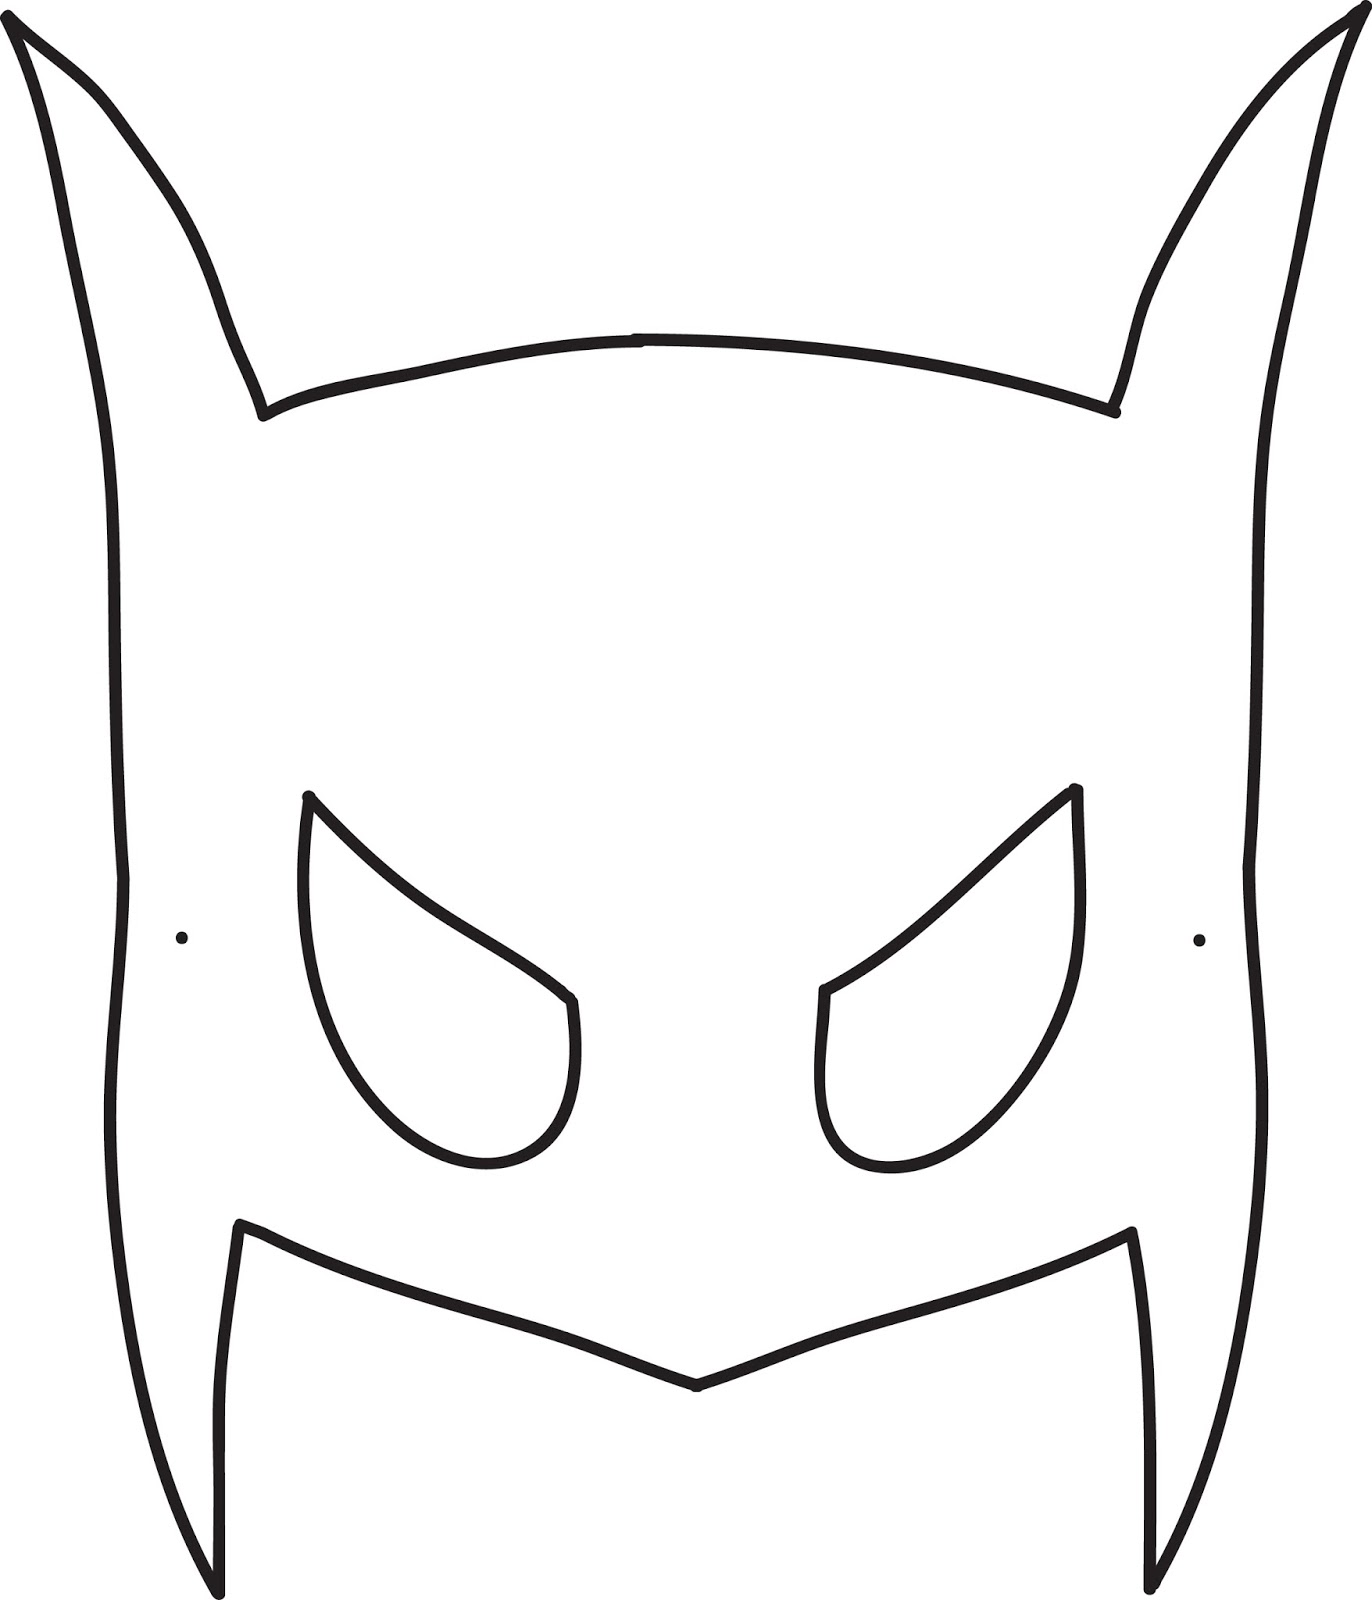 Batman Mask Template Images & Pictures - Becuo